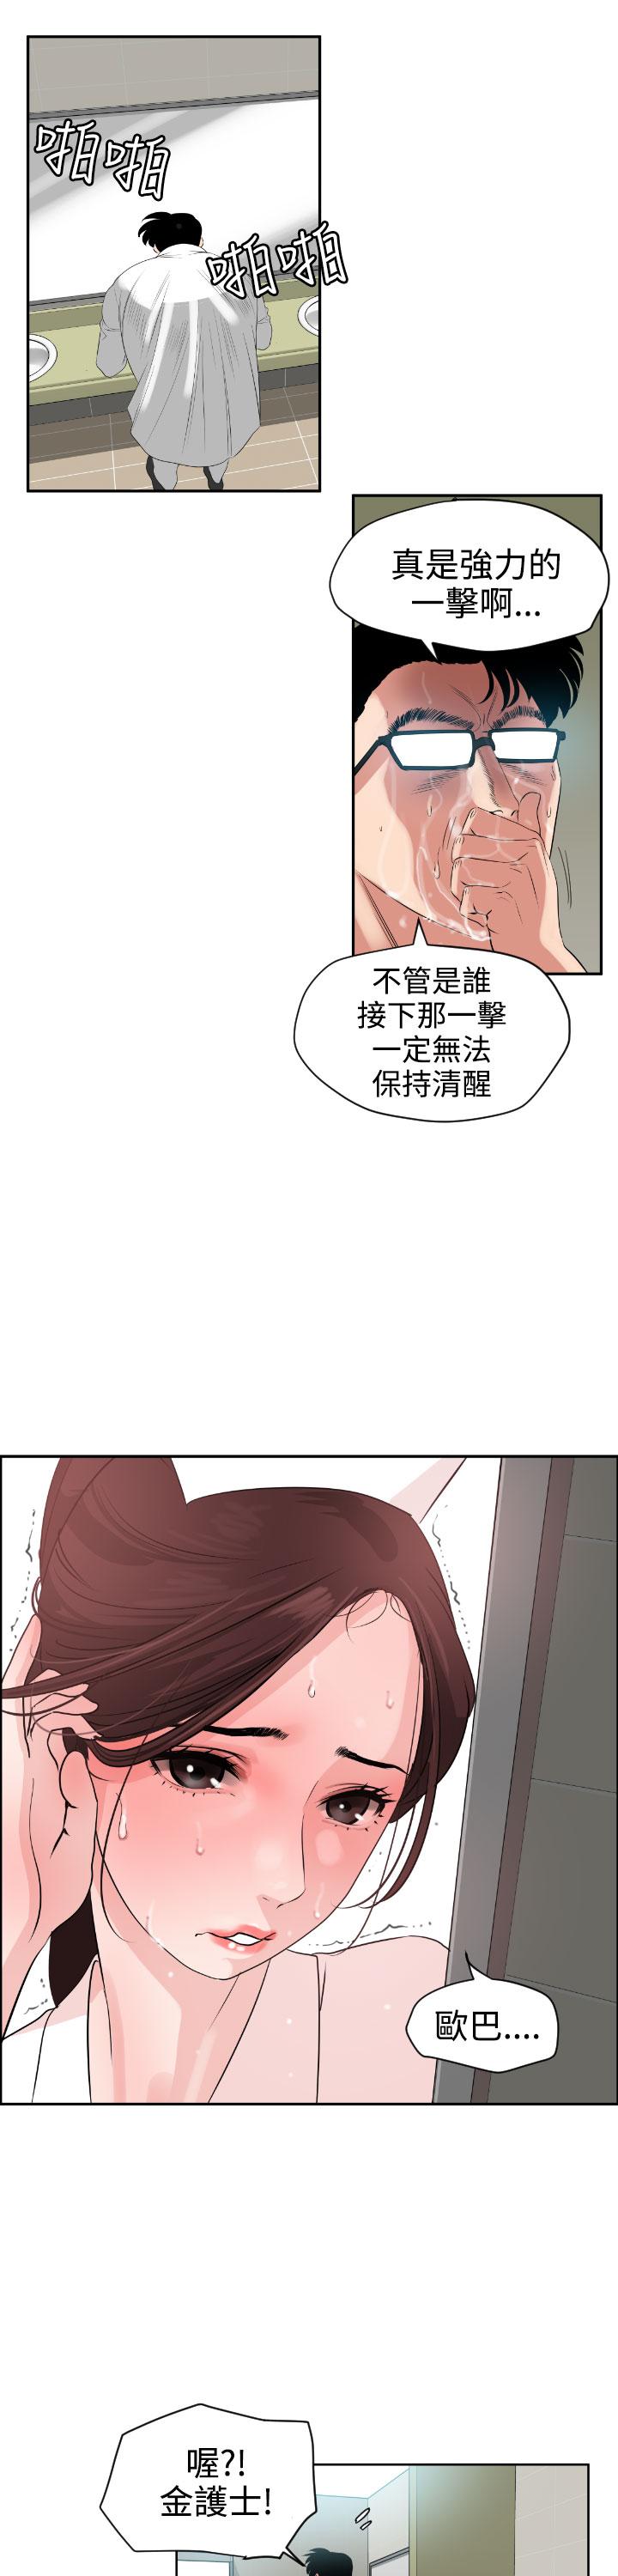 Desire King (慾求王) Ch.1-12 (chinese) 172